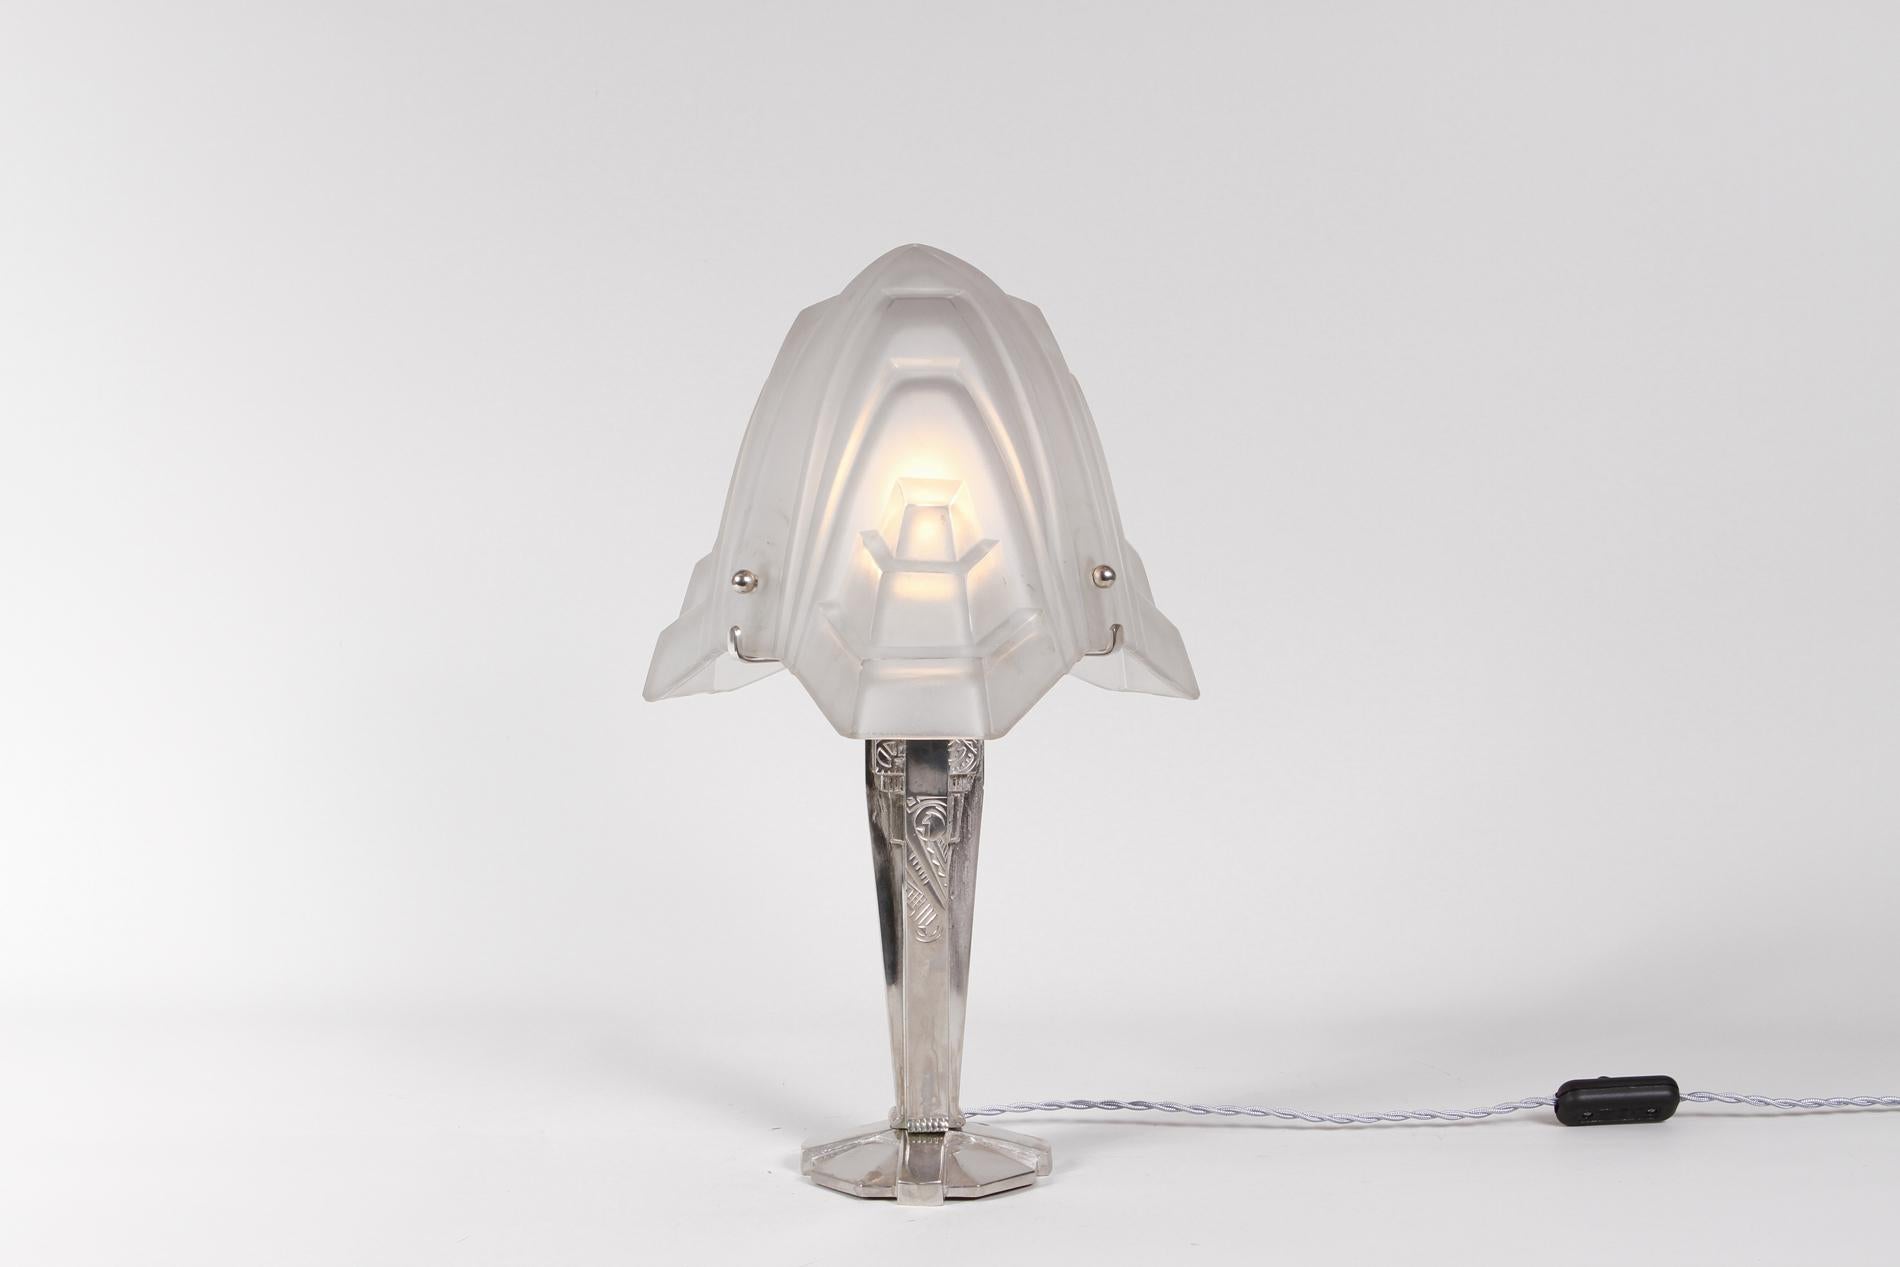 French Art Deco table lamp with nickeled bronze for the base and glass lampshade from Degué, 1930. 

The particularity of the lamp is the shape of the glass, designed like a flower and the base with a delicate flower decor bringing elegant light and